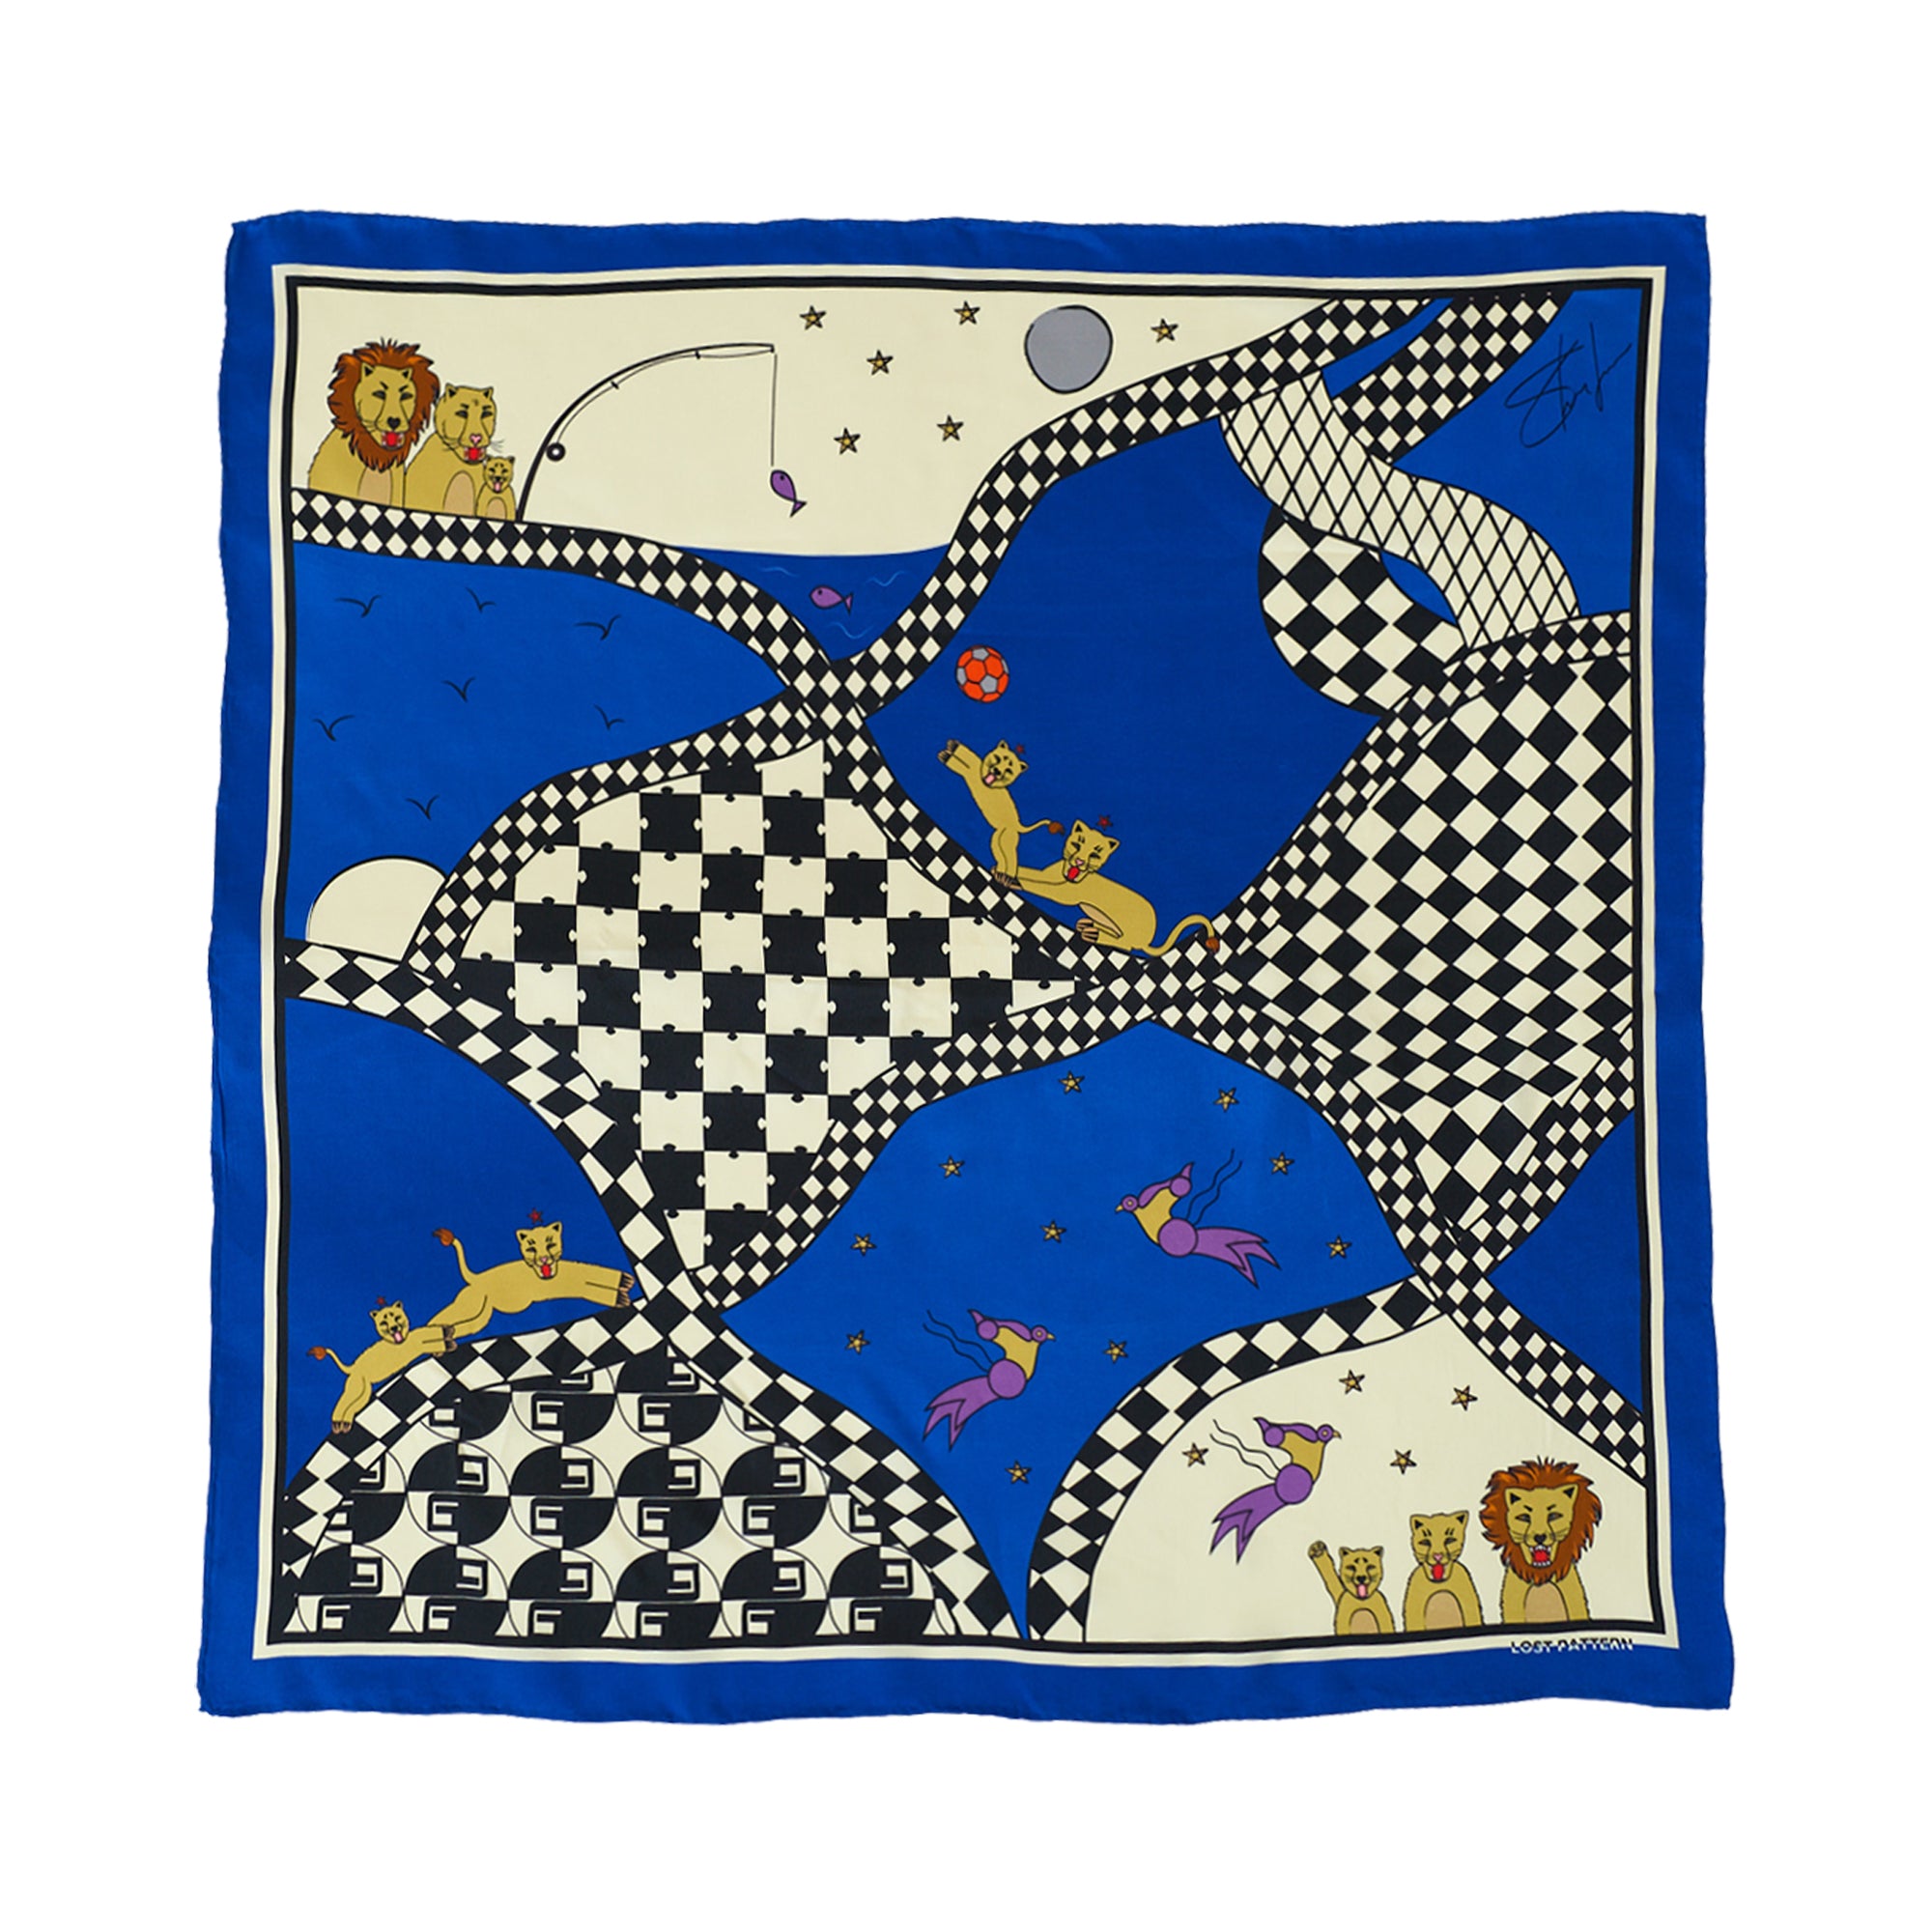 "Journey" Silk Scarf by SHANTALL LACAYO - Electric Blue - Electric Blue - LOST PATTERN Silk Square Scarf